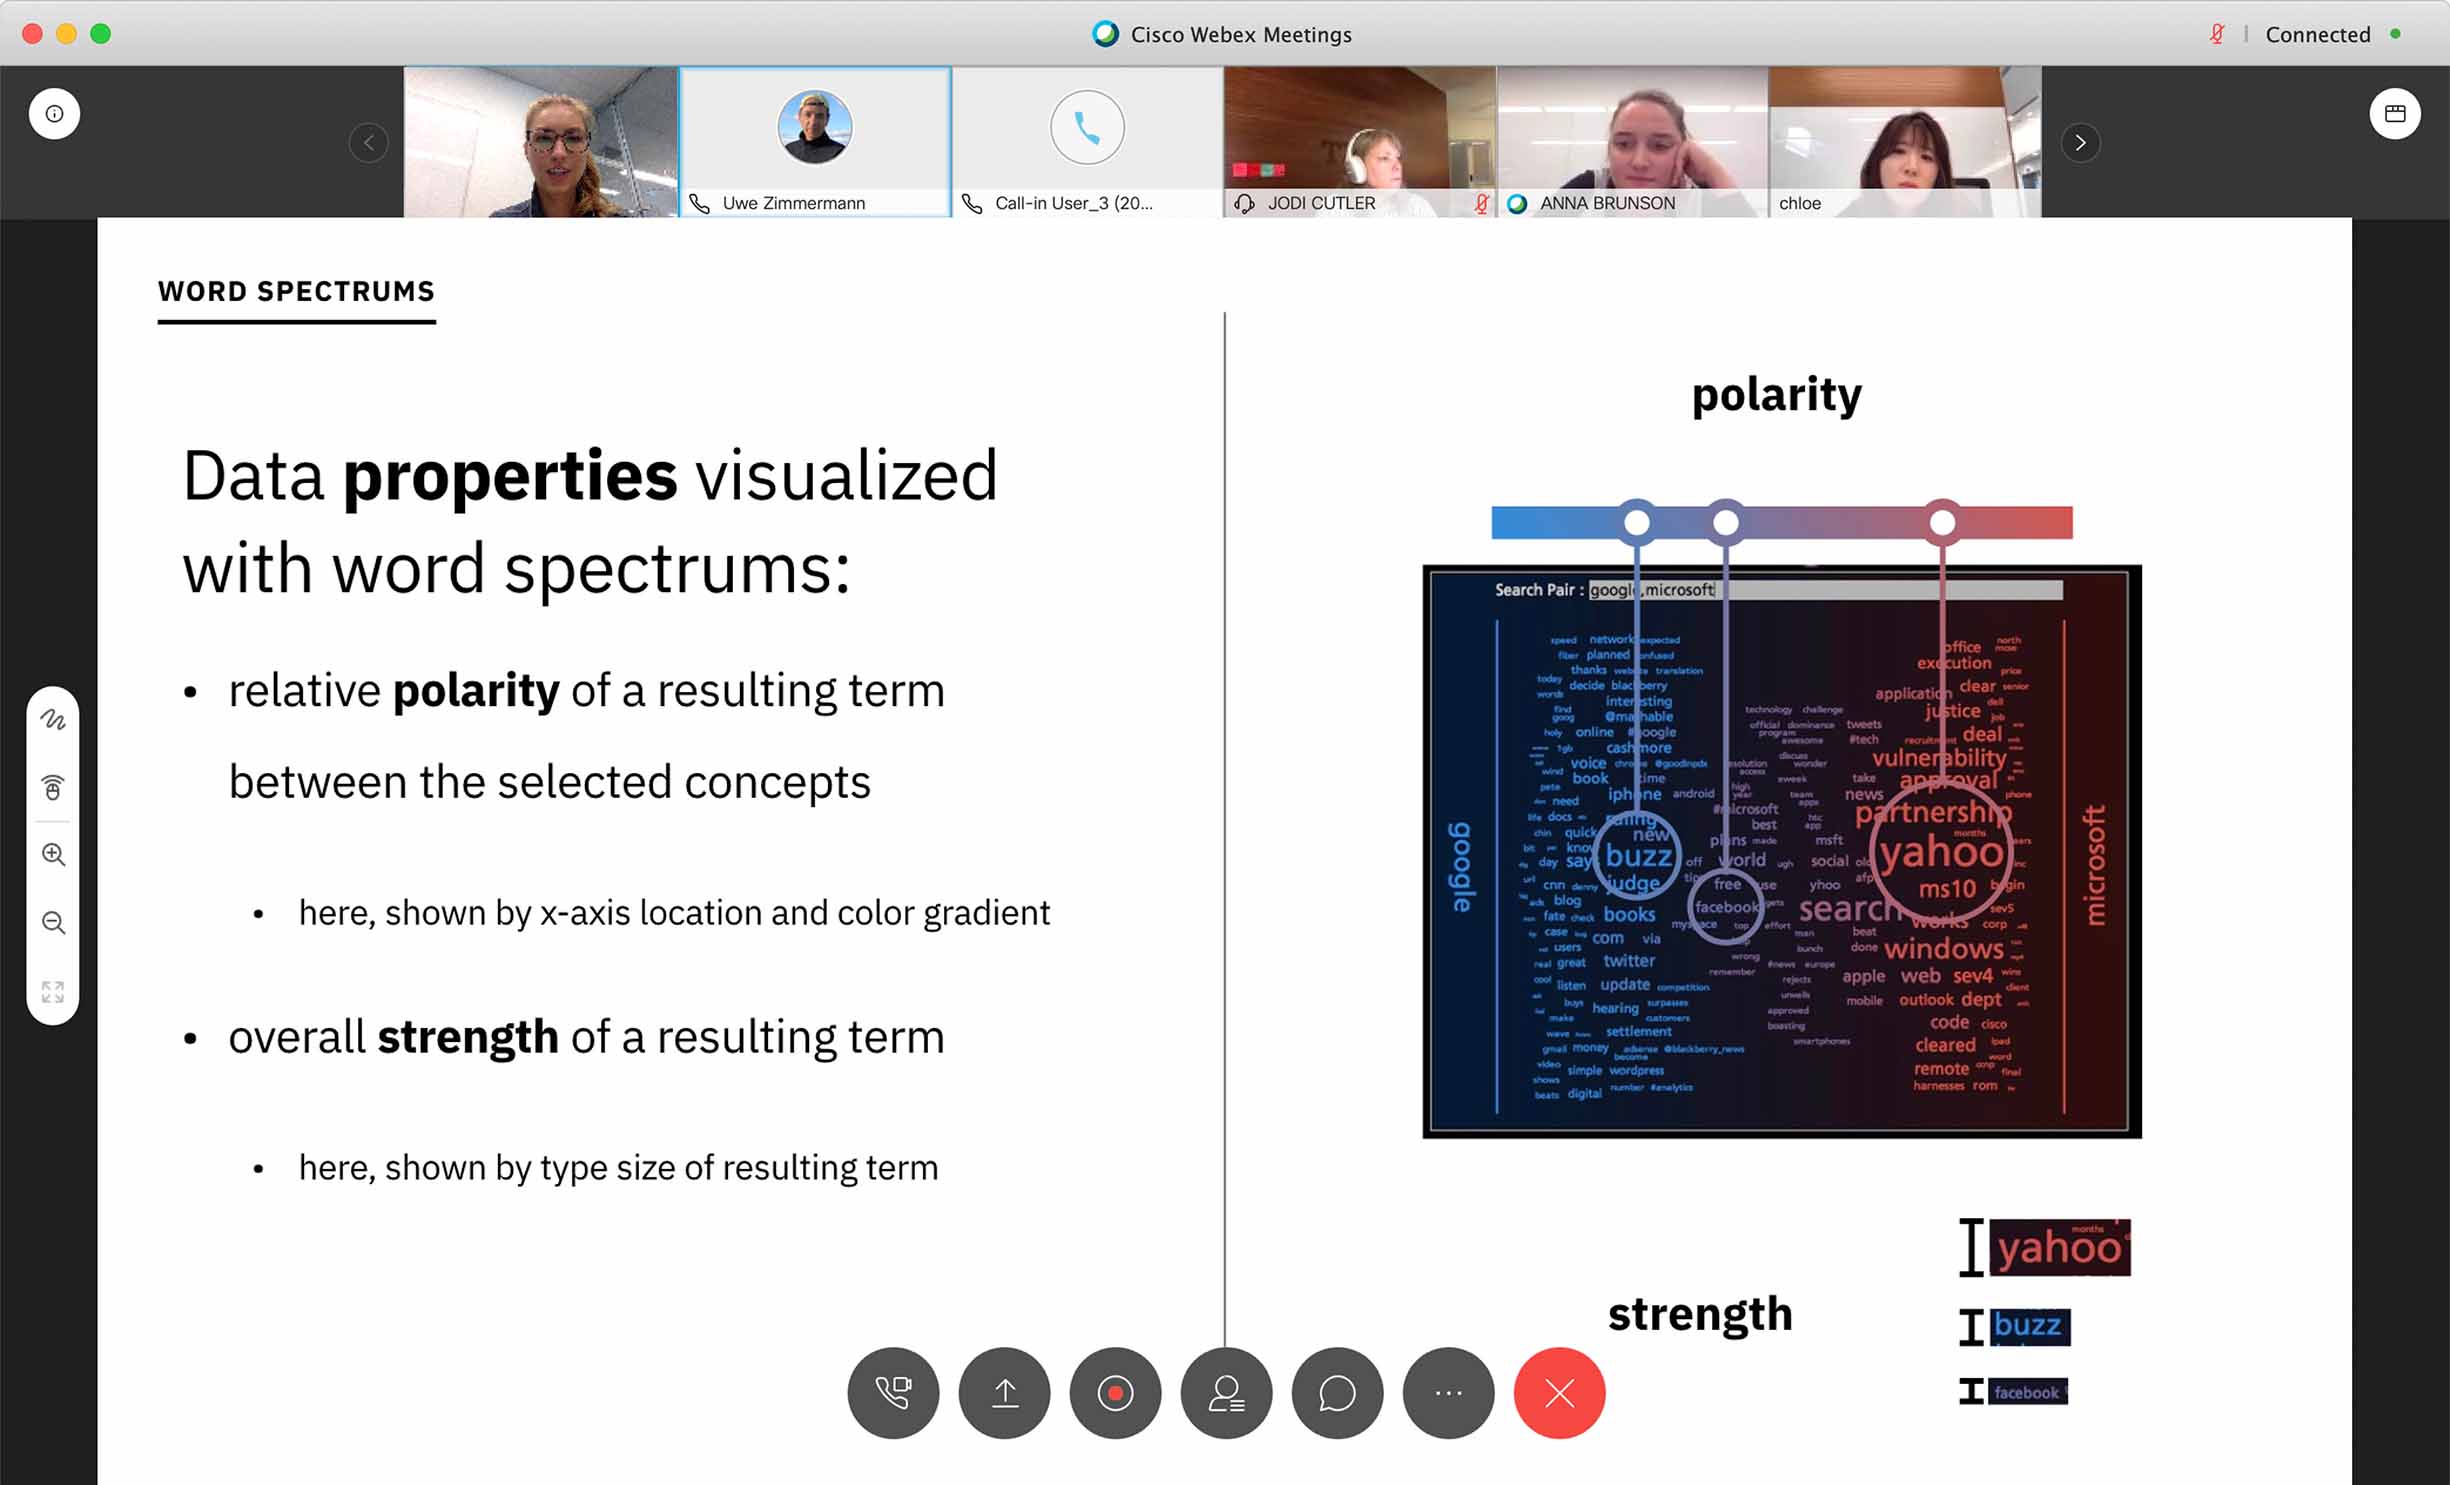 A screenshot of the Webex remote screensharing app while I present about word spectrums.